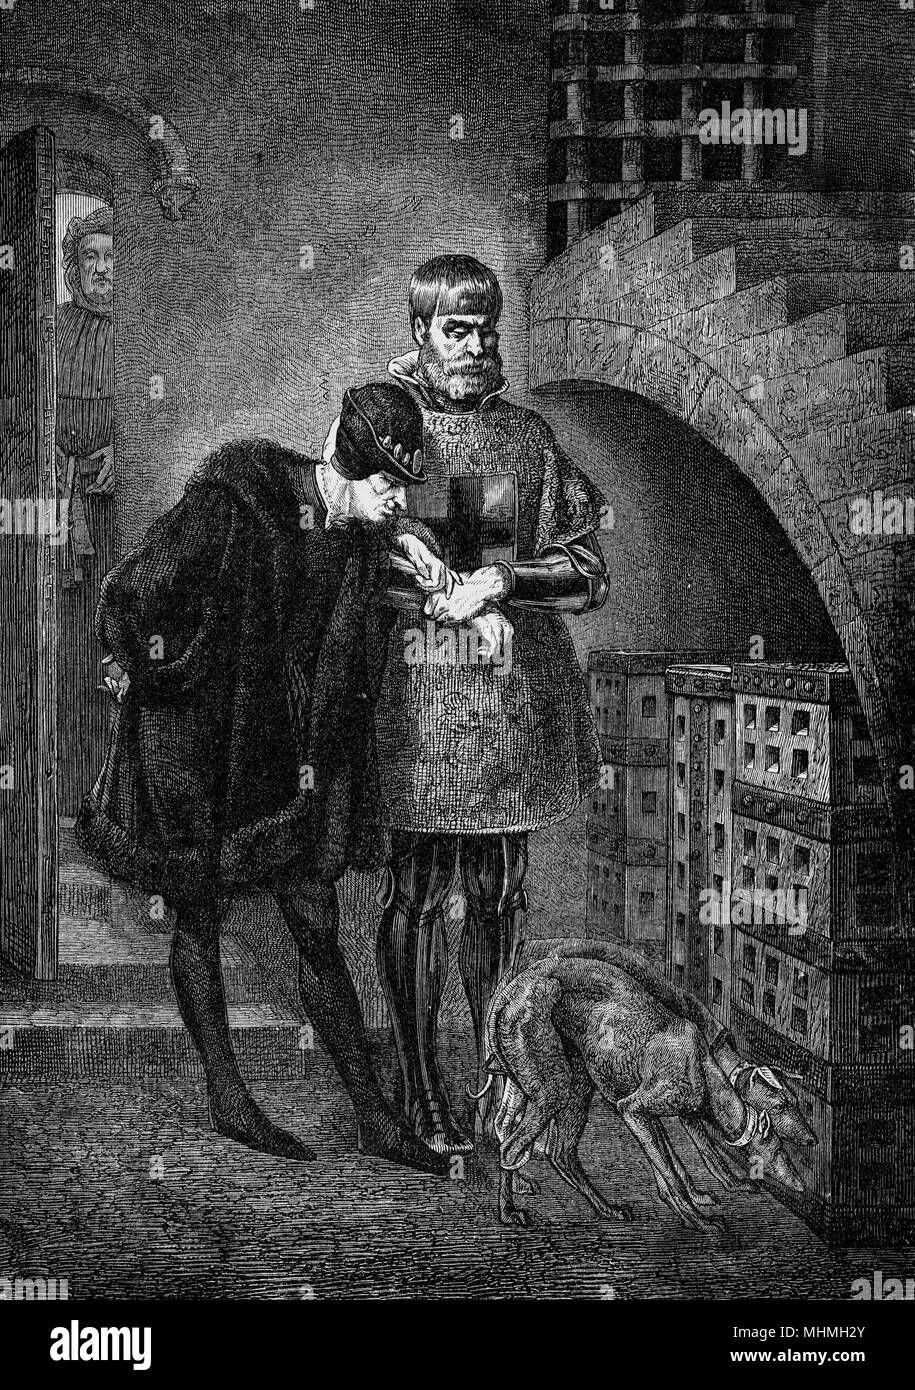 Louis XI visits his prisoner, Cardinal Balue, whom he kept in this little cage at the chateau of Plessis-lez-Tours from 1469 to 1480, when he was released at the Pope's request      Date: 1469 to 1480 Stock Photo